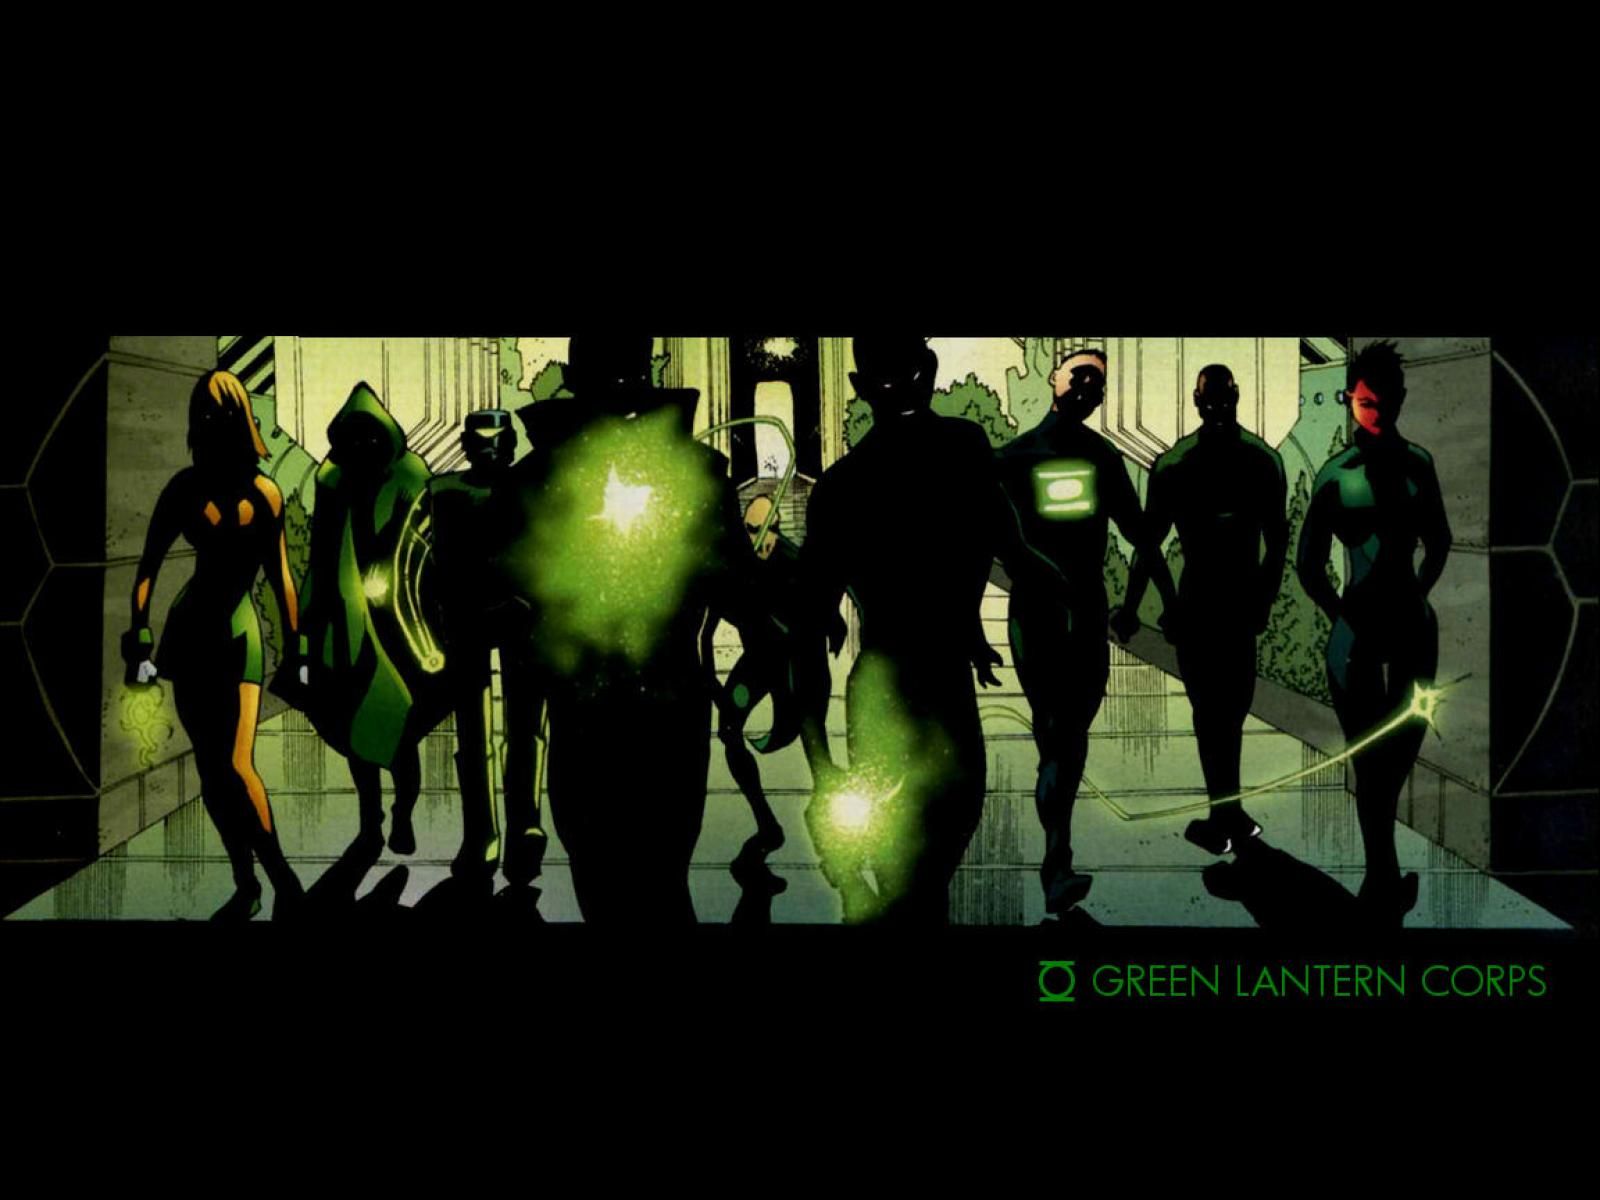 The Green Lantern Corps image the team HD wallpaper and 1600x1200